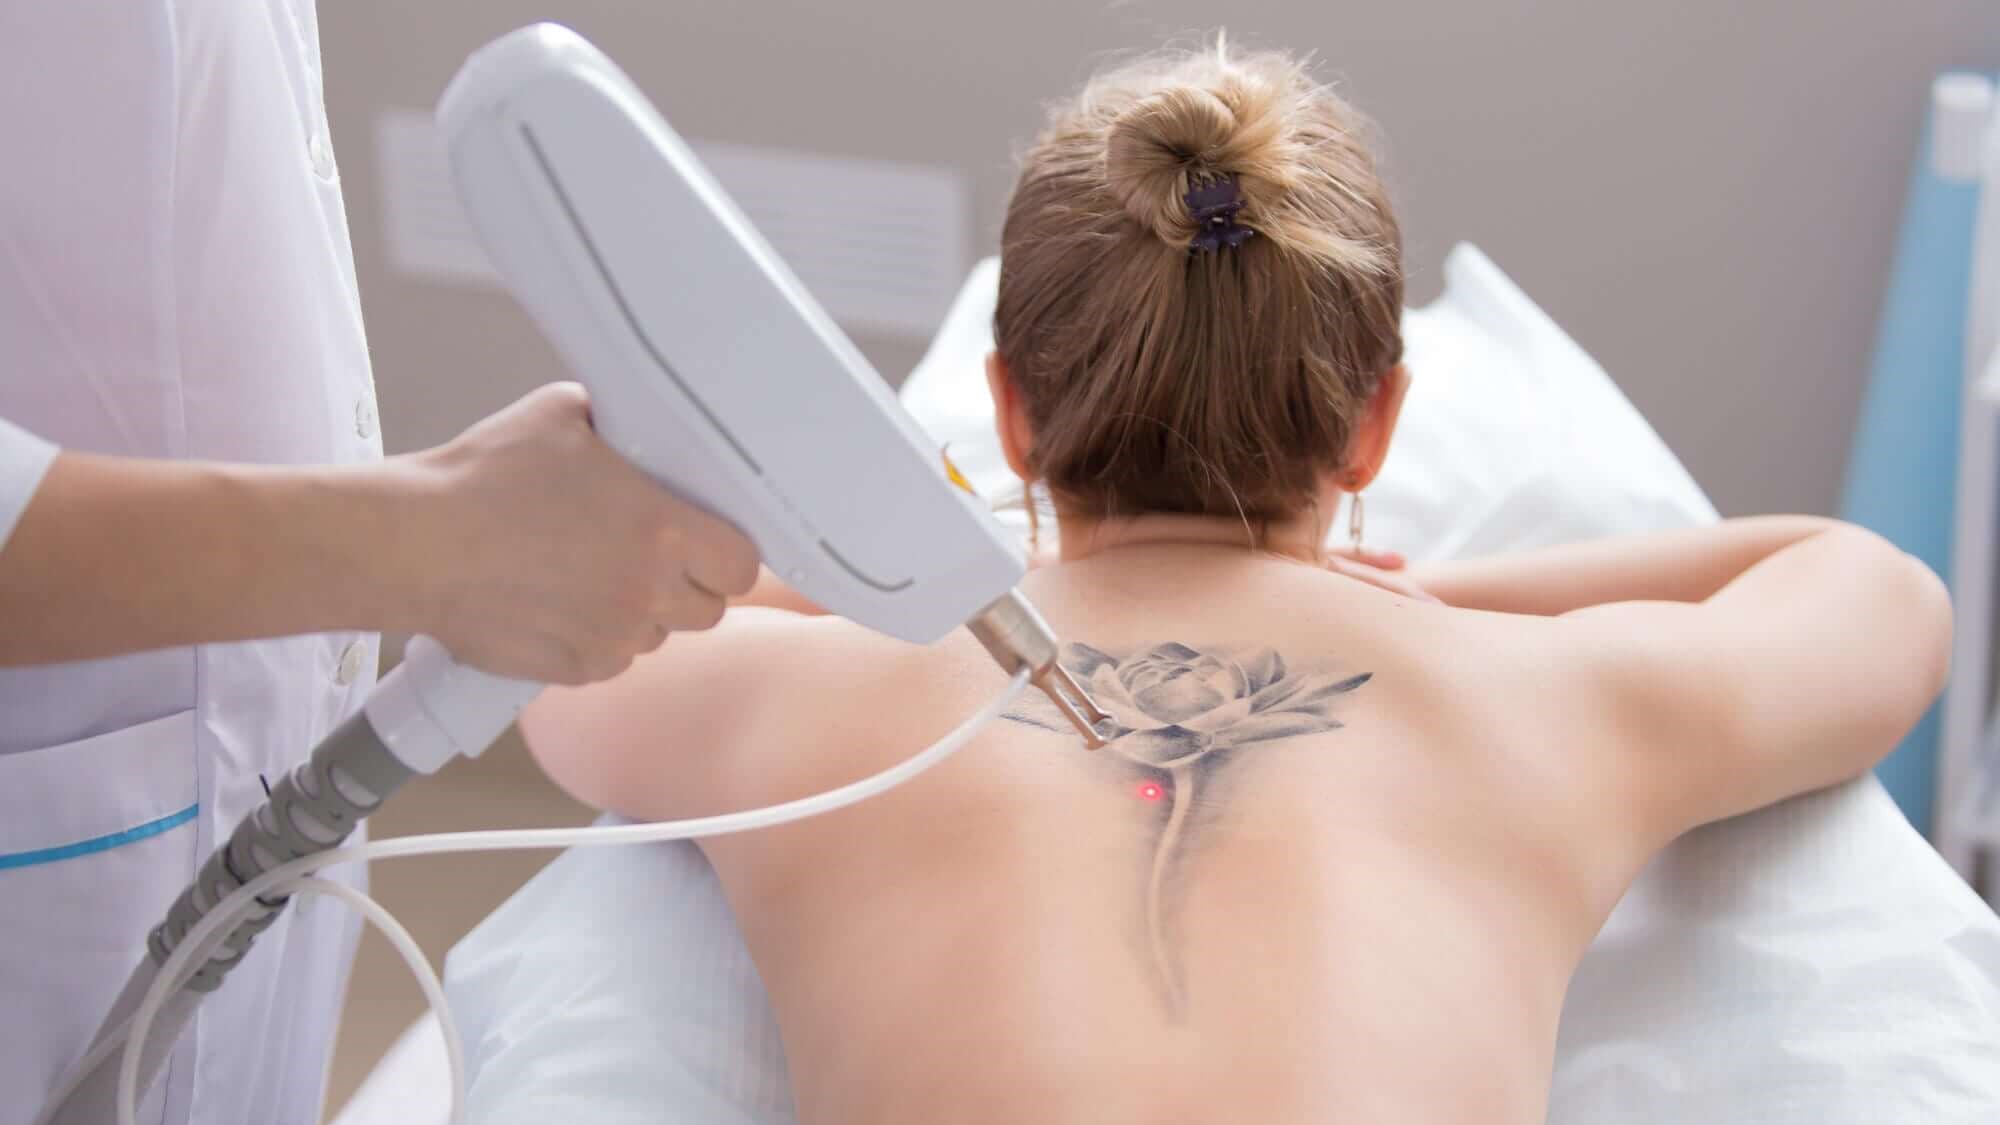 The Reasons Why People Decide to Get Their Tattoos Removed